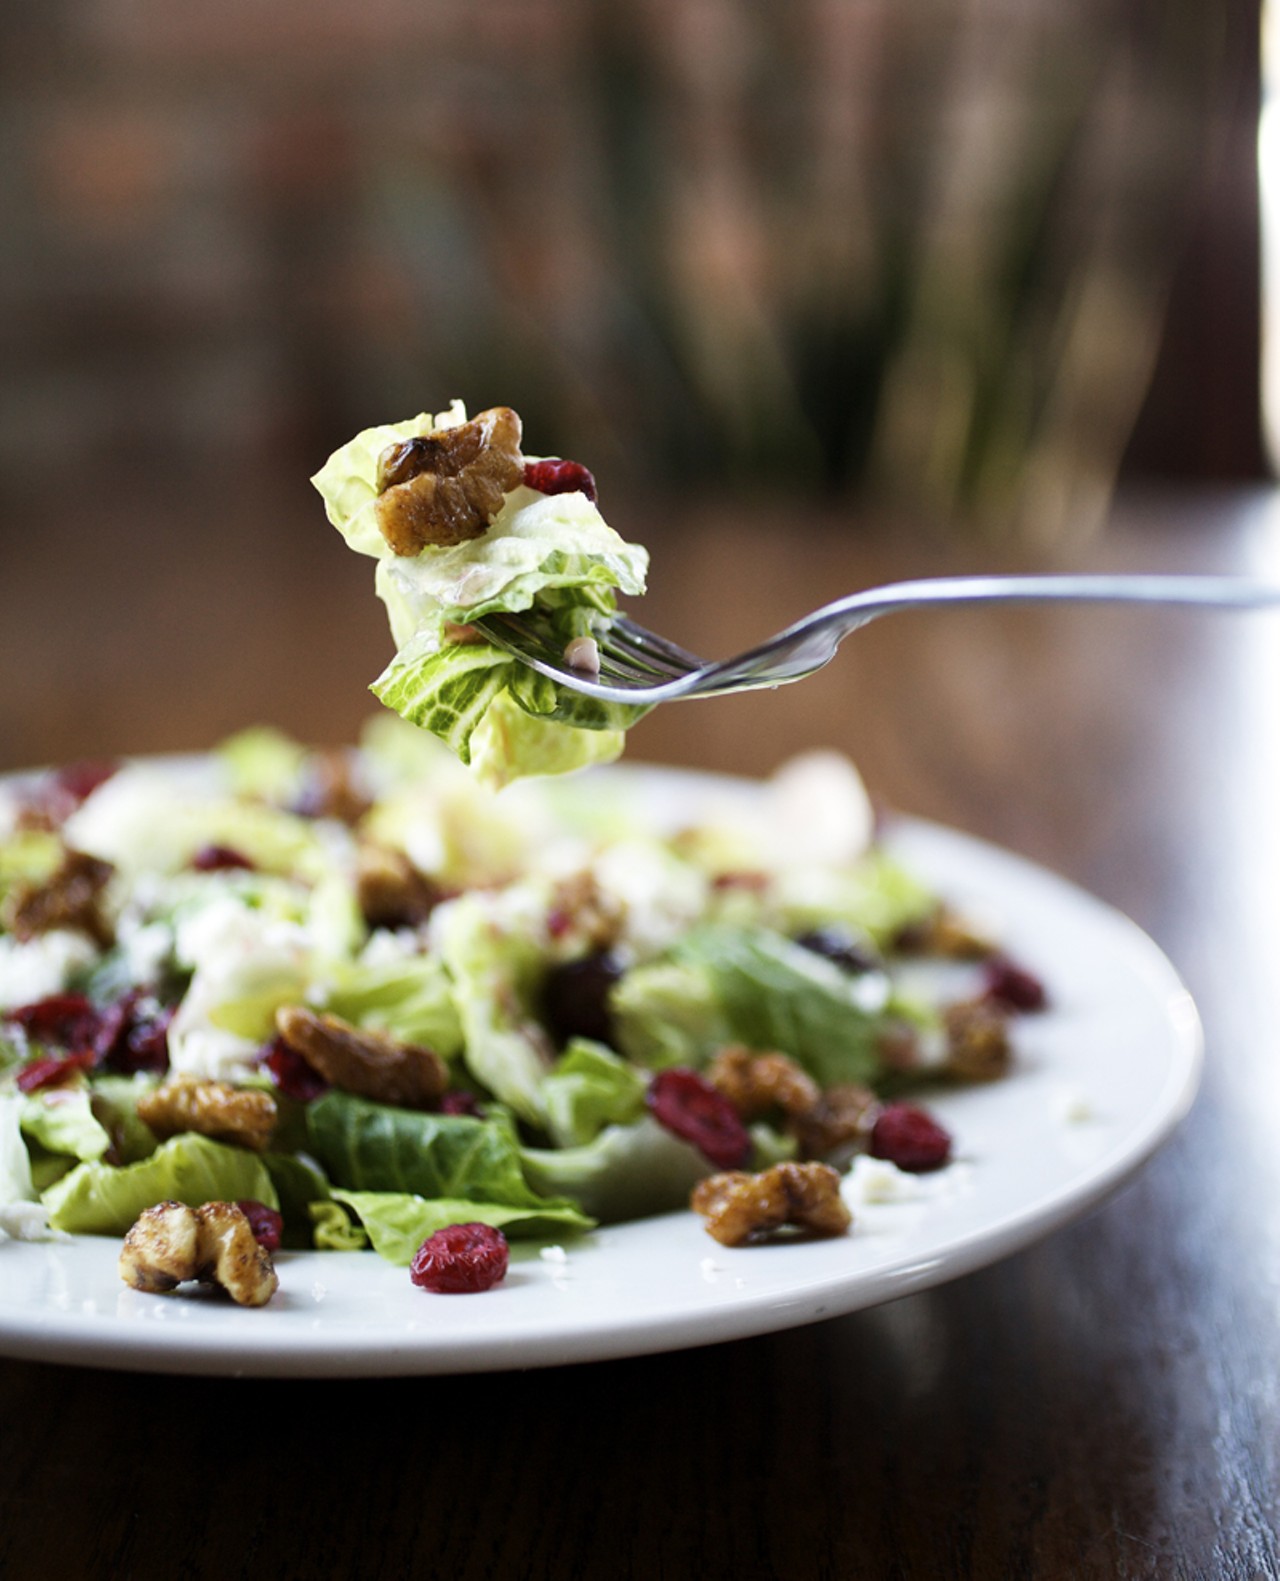 The Bistro Salad is Romaine lettuce, red grapes, dried cranberries, candied walnuts and feta cheese. It is served with fat free raspberry vinaigrette.